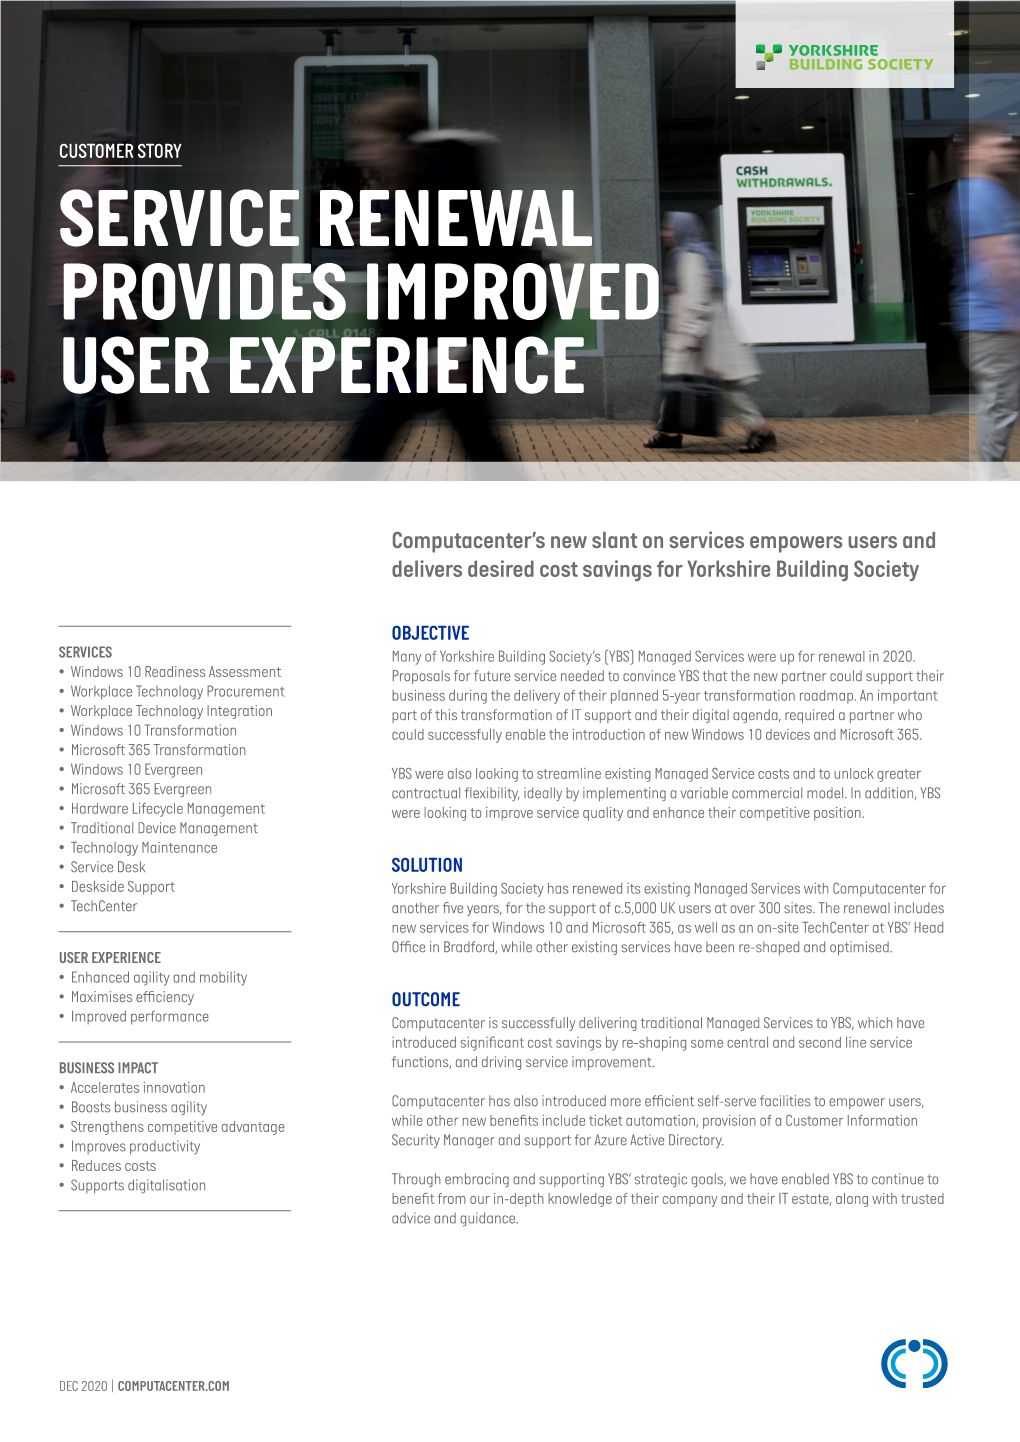 Service Renewal Provides Improved User Experience